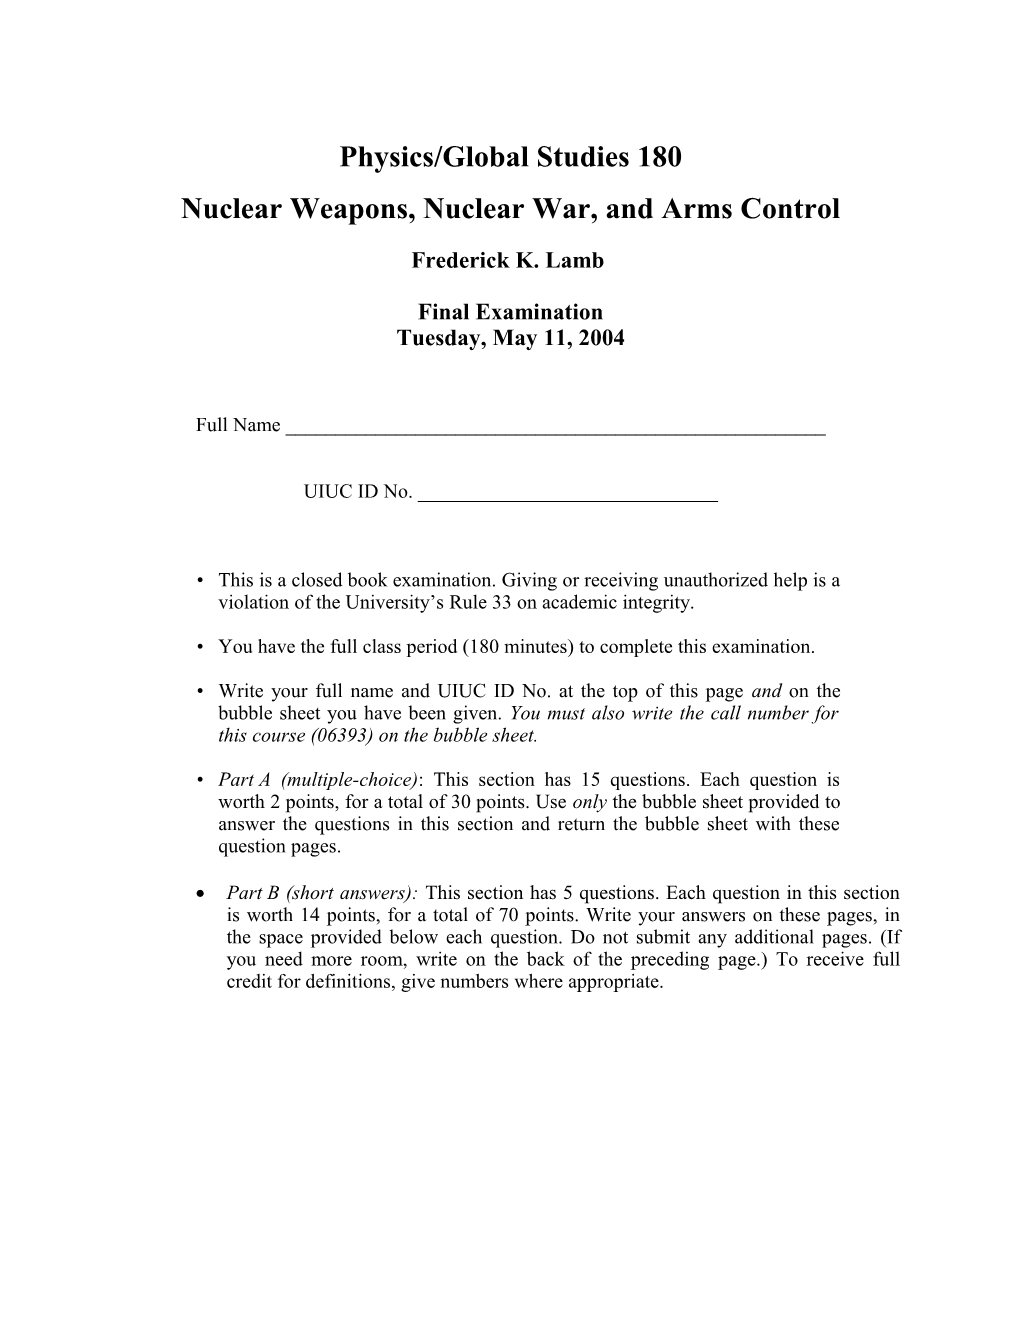 Nuclear Weapons, Nuclear War, and Arms Control